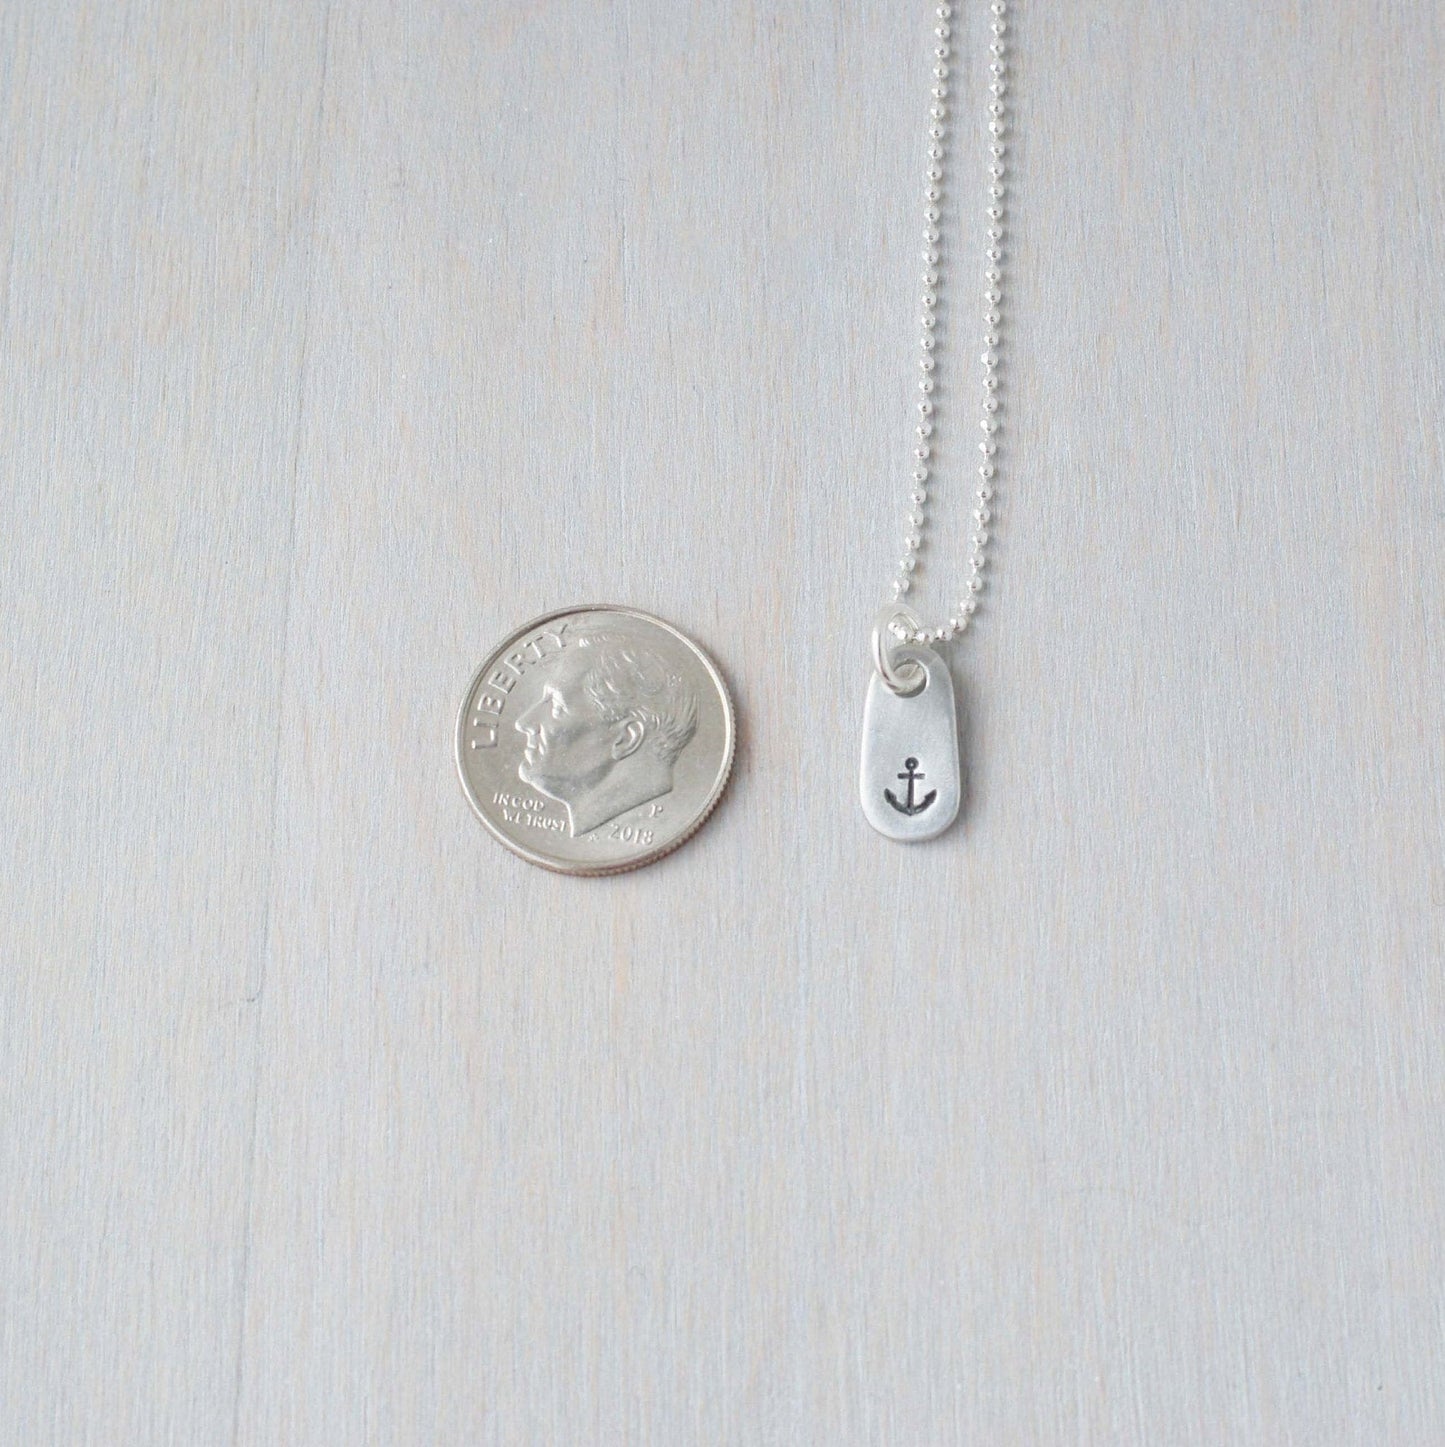 Dainty Handstamped Anchor Necklace in Pewter next to dime for scale